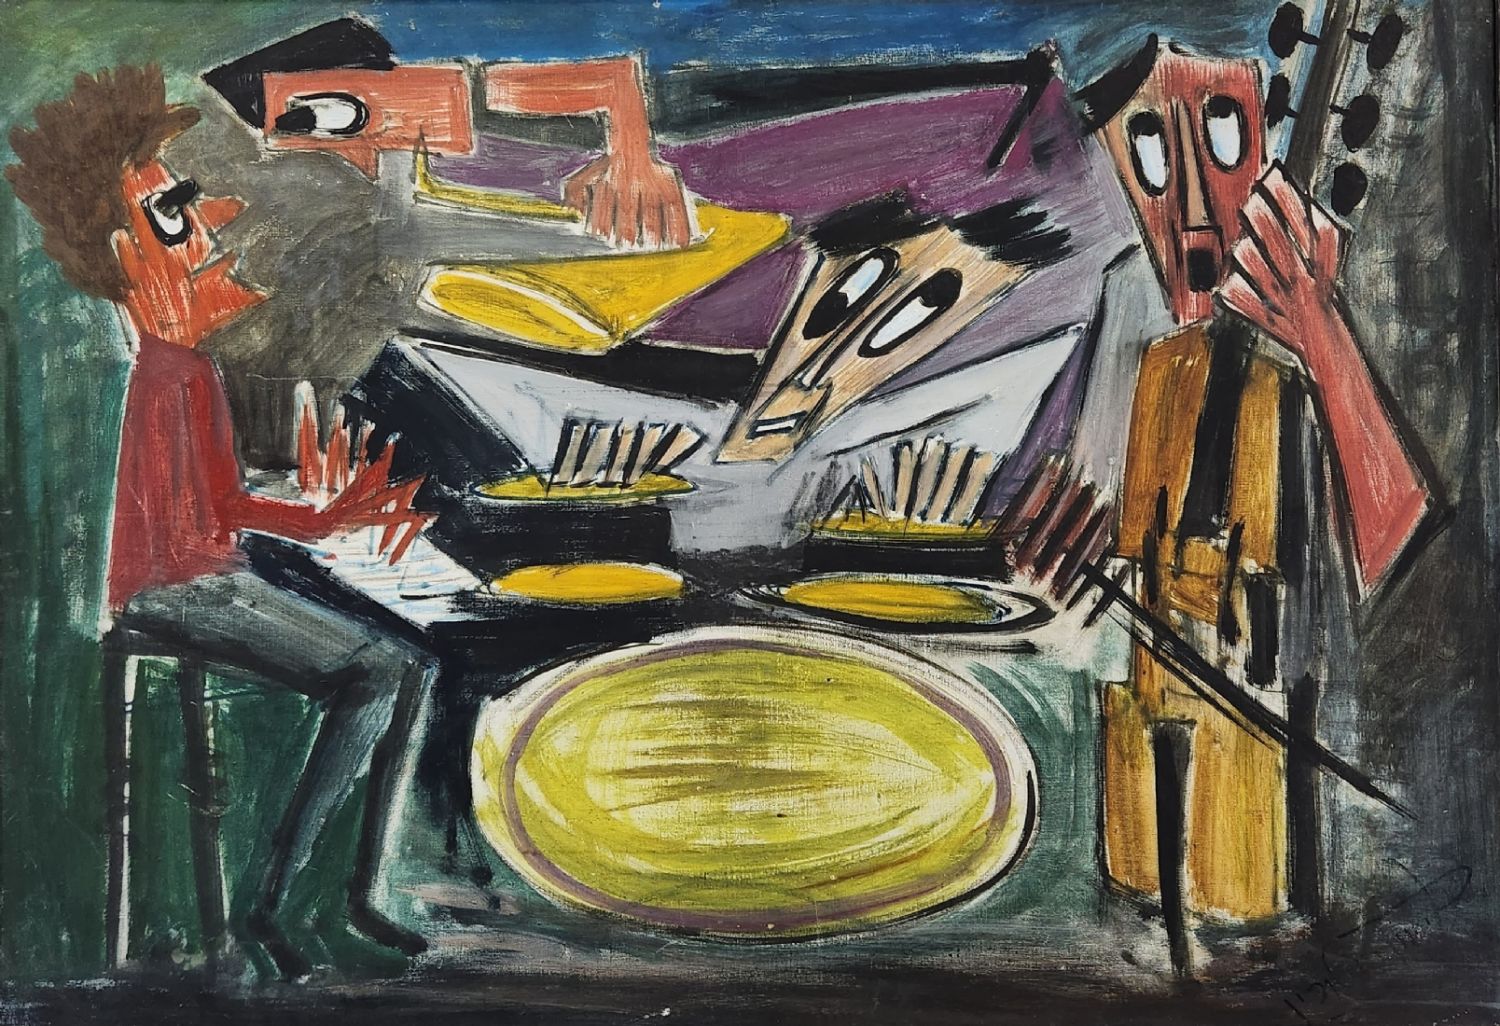 'Four Jazz Players' - painting, oil on canvas, signed (we would be happy for help in identifying the